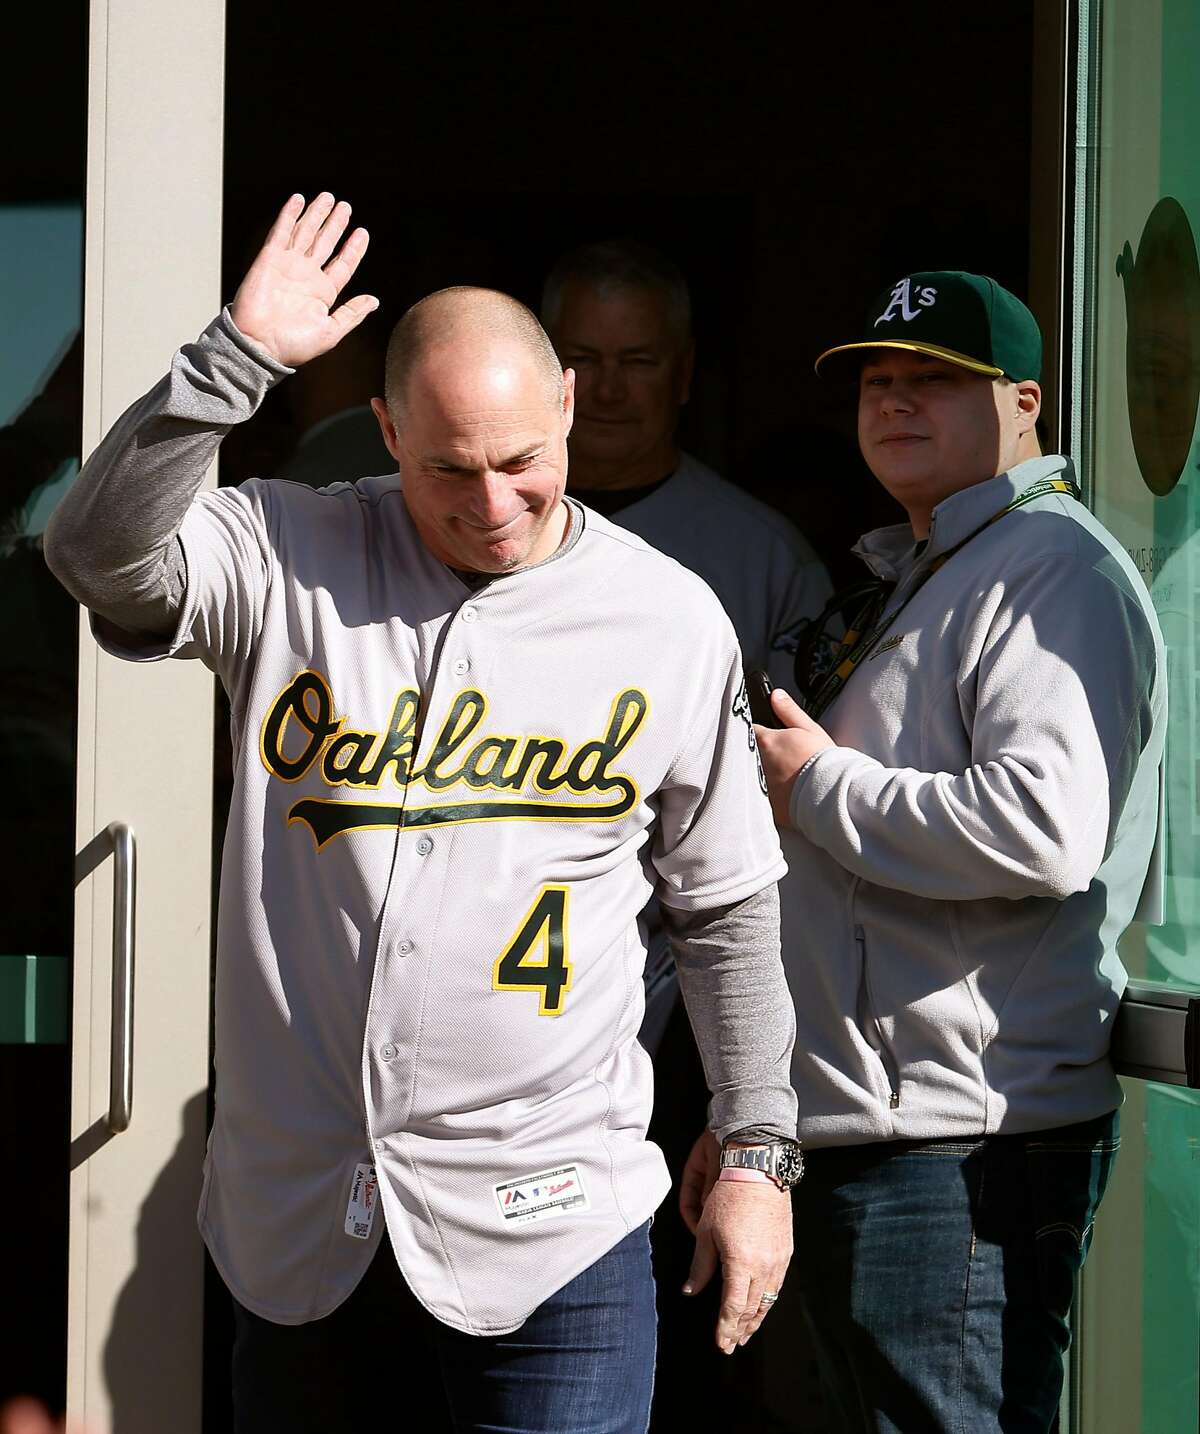 Third base coach Chip Hale waves as he's introduced to fans at the Oakland A's FanFest celebration on Jack London Square in Oakland, Calif. on Saturday, Jan. 28, 2017.